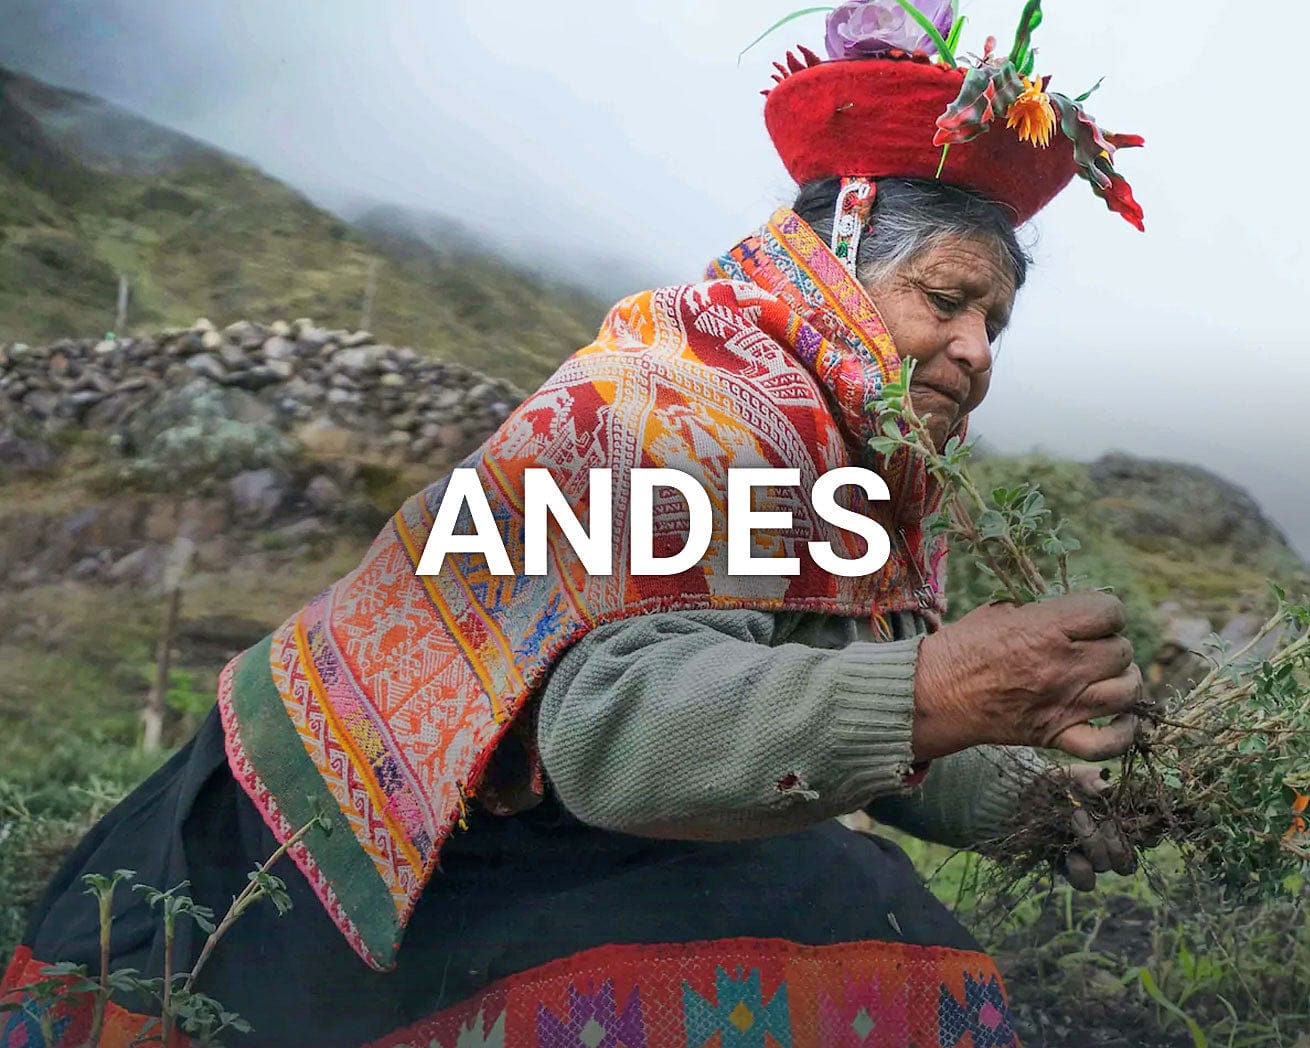 Andes main image